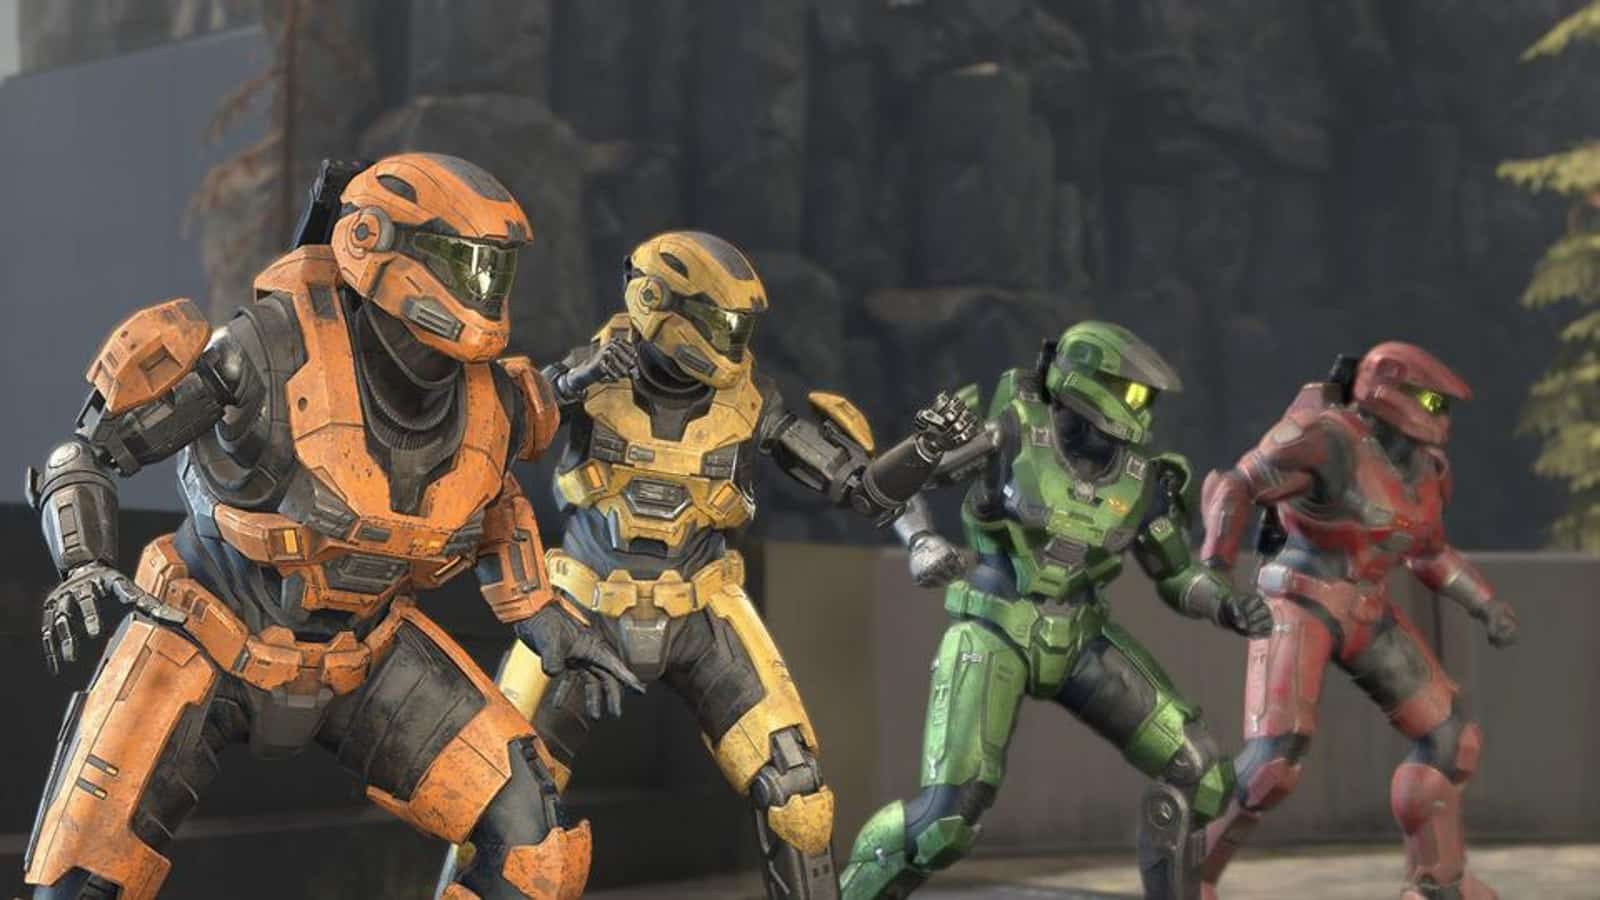 Image of spartans from Halo Infinite